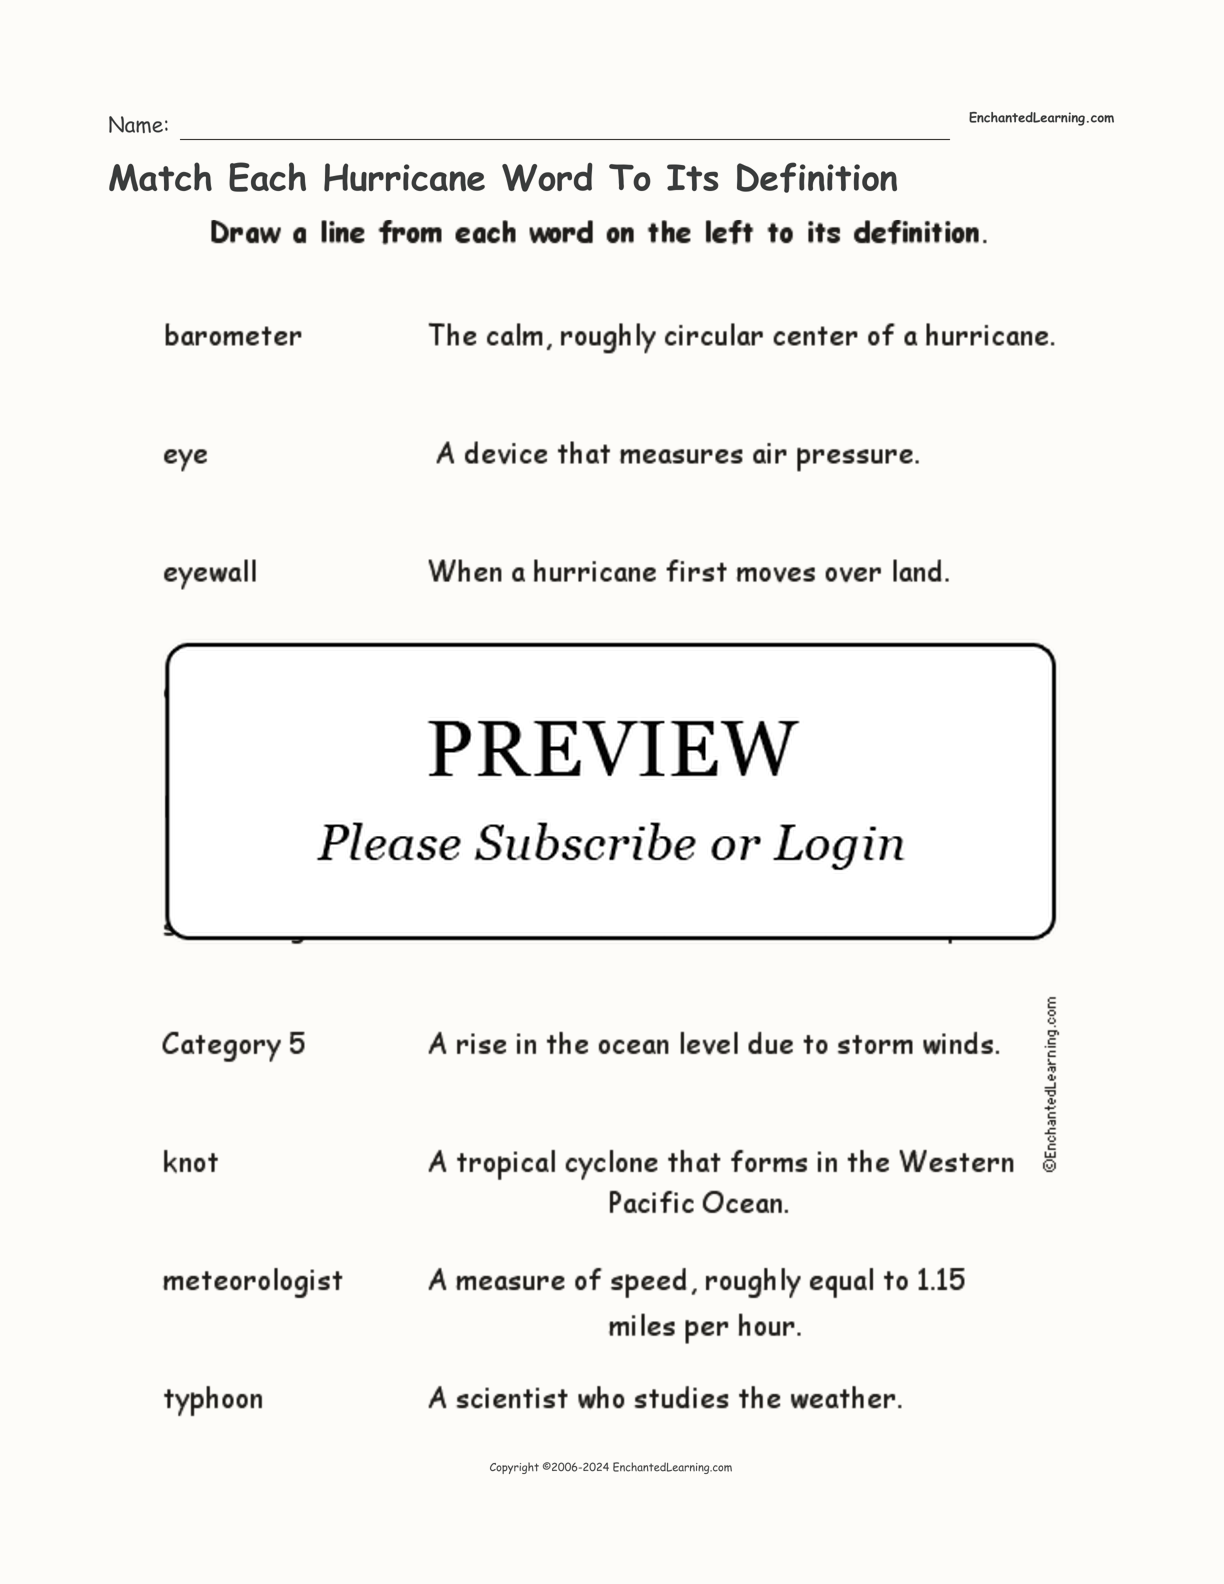 Match Each Hurricane Word To Its Definition interactive worksheet page 1